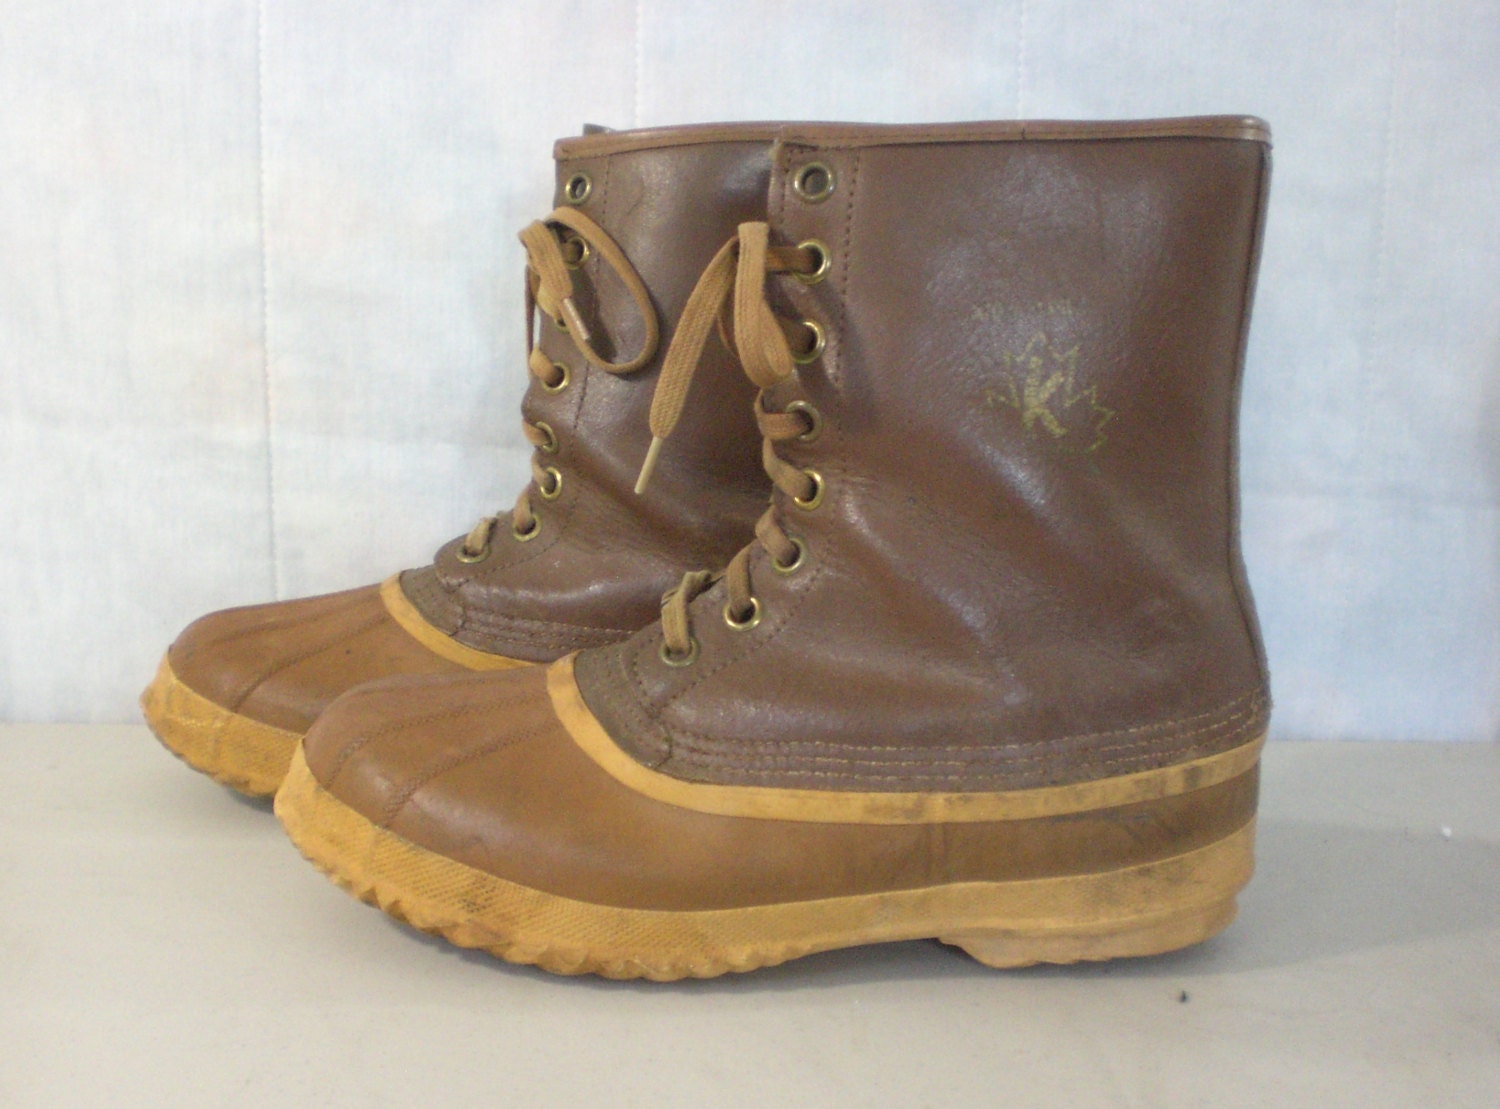 Mens Wide Width Winter Boots Canada | Division of Global Affairs